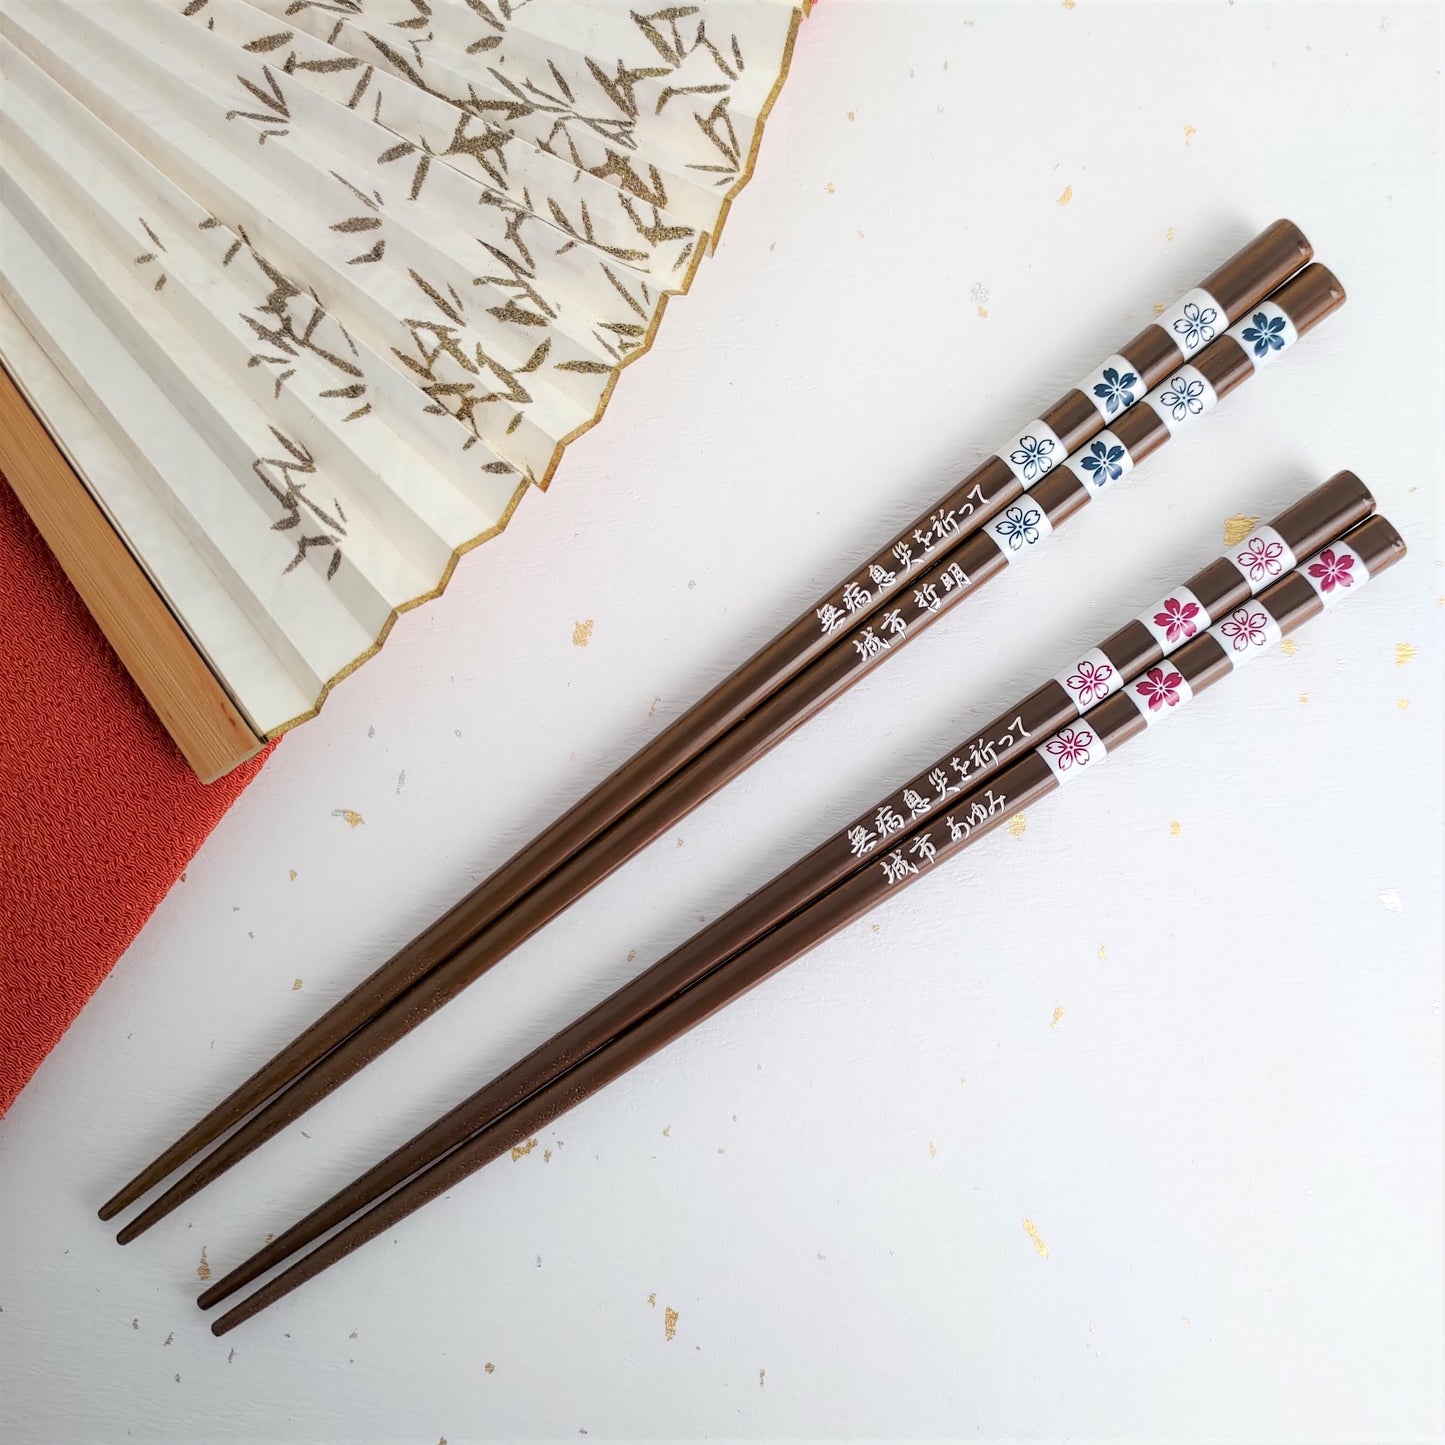 Square Cherry blossom magnetism Japanese chopsticks blue pink - DOUBLE PAIR